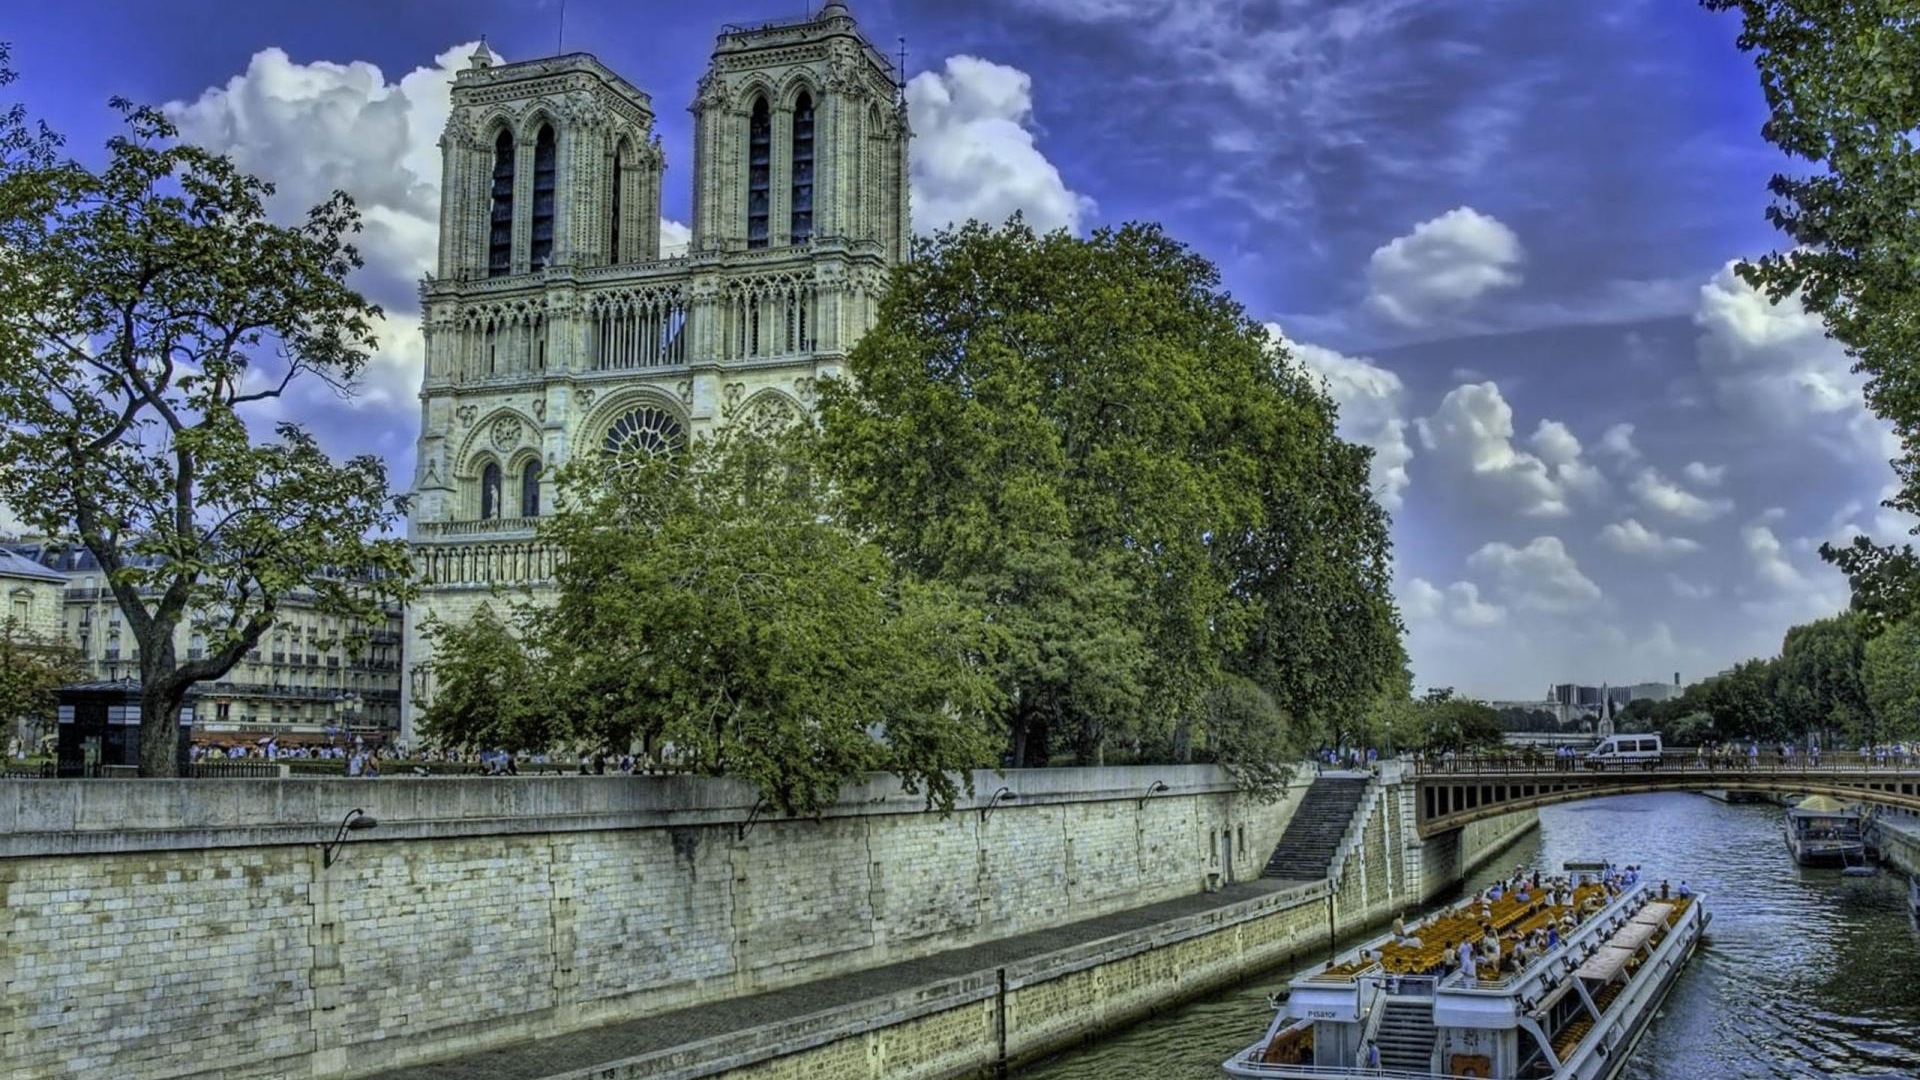 Notre Dame HD Wallpapers #10 - 1920x1080